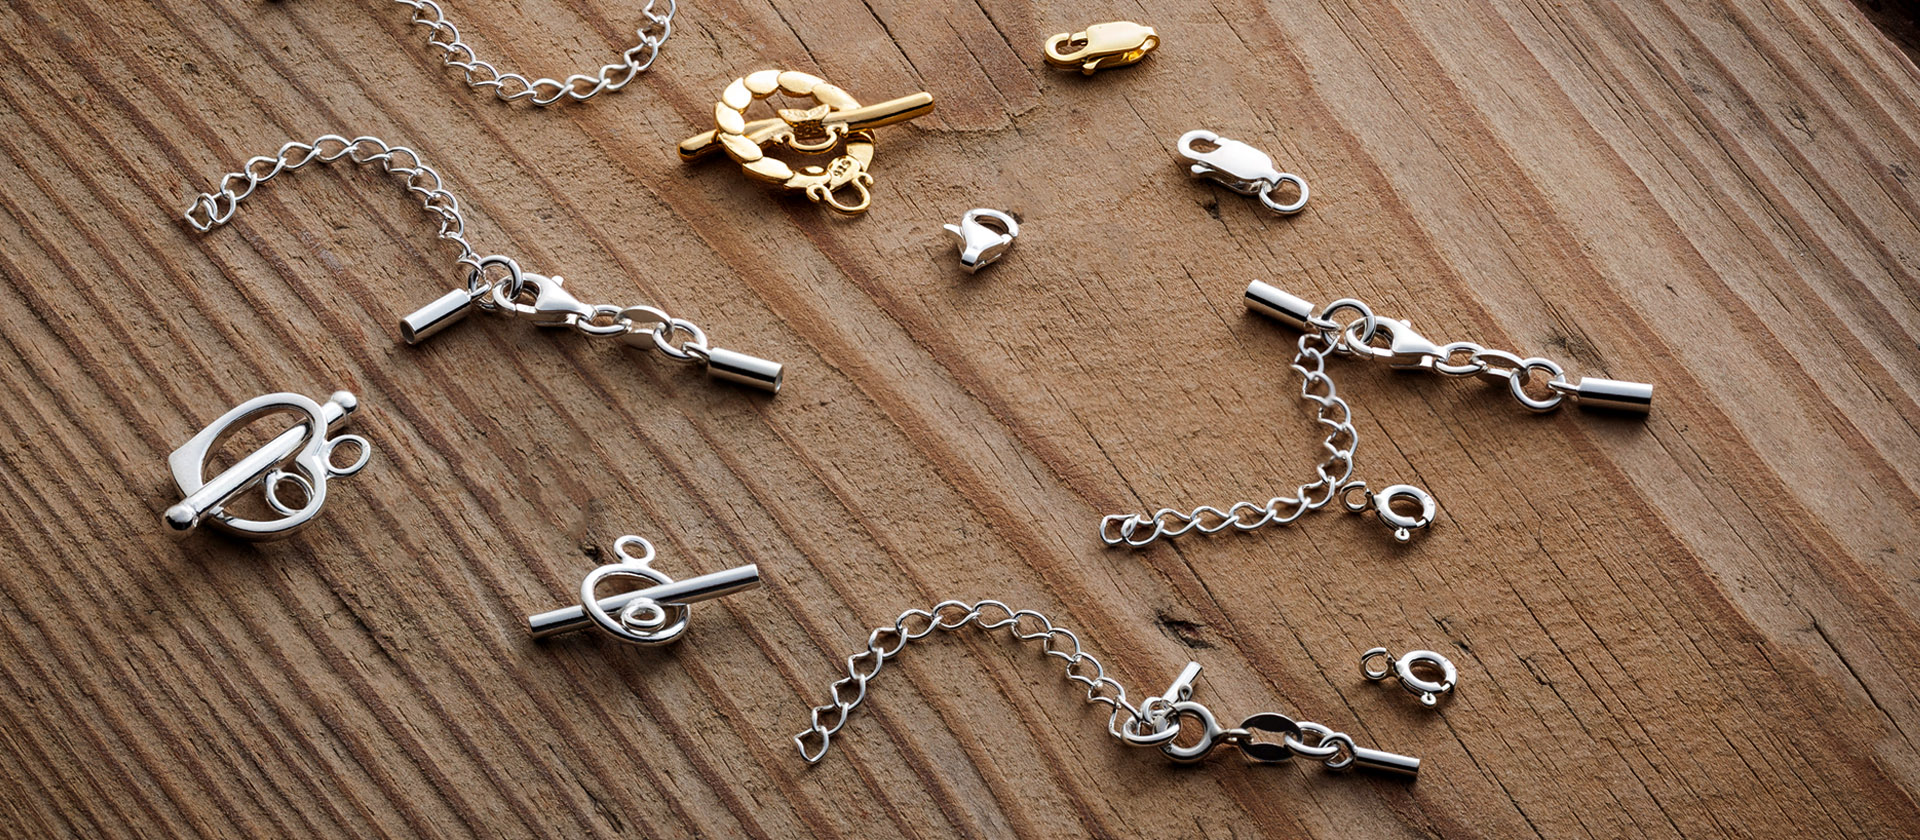 Types of Clasps for Jewelry Making|Jewelry Making Chains Supplies Wholesaler